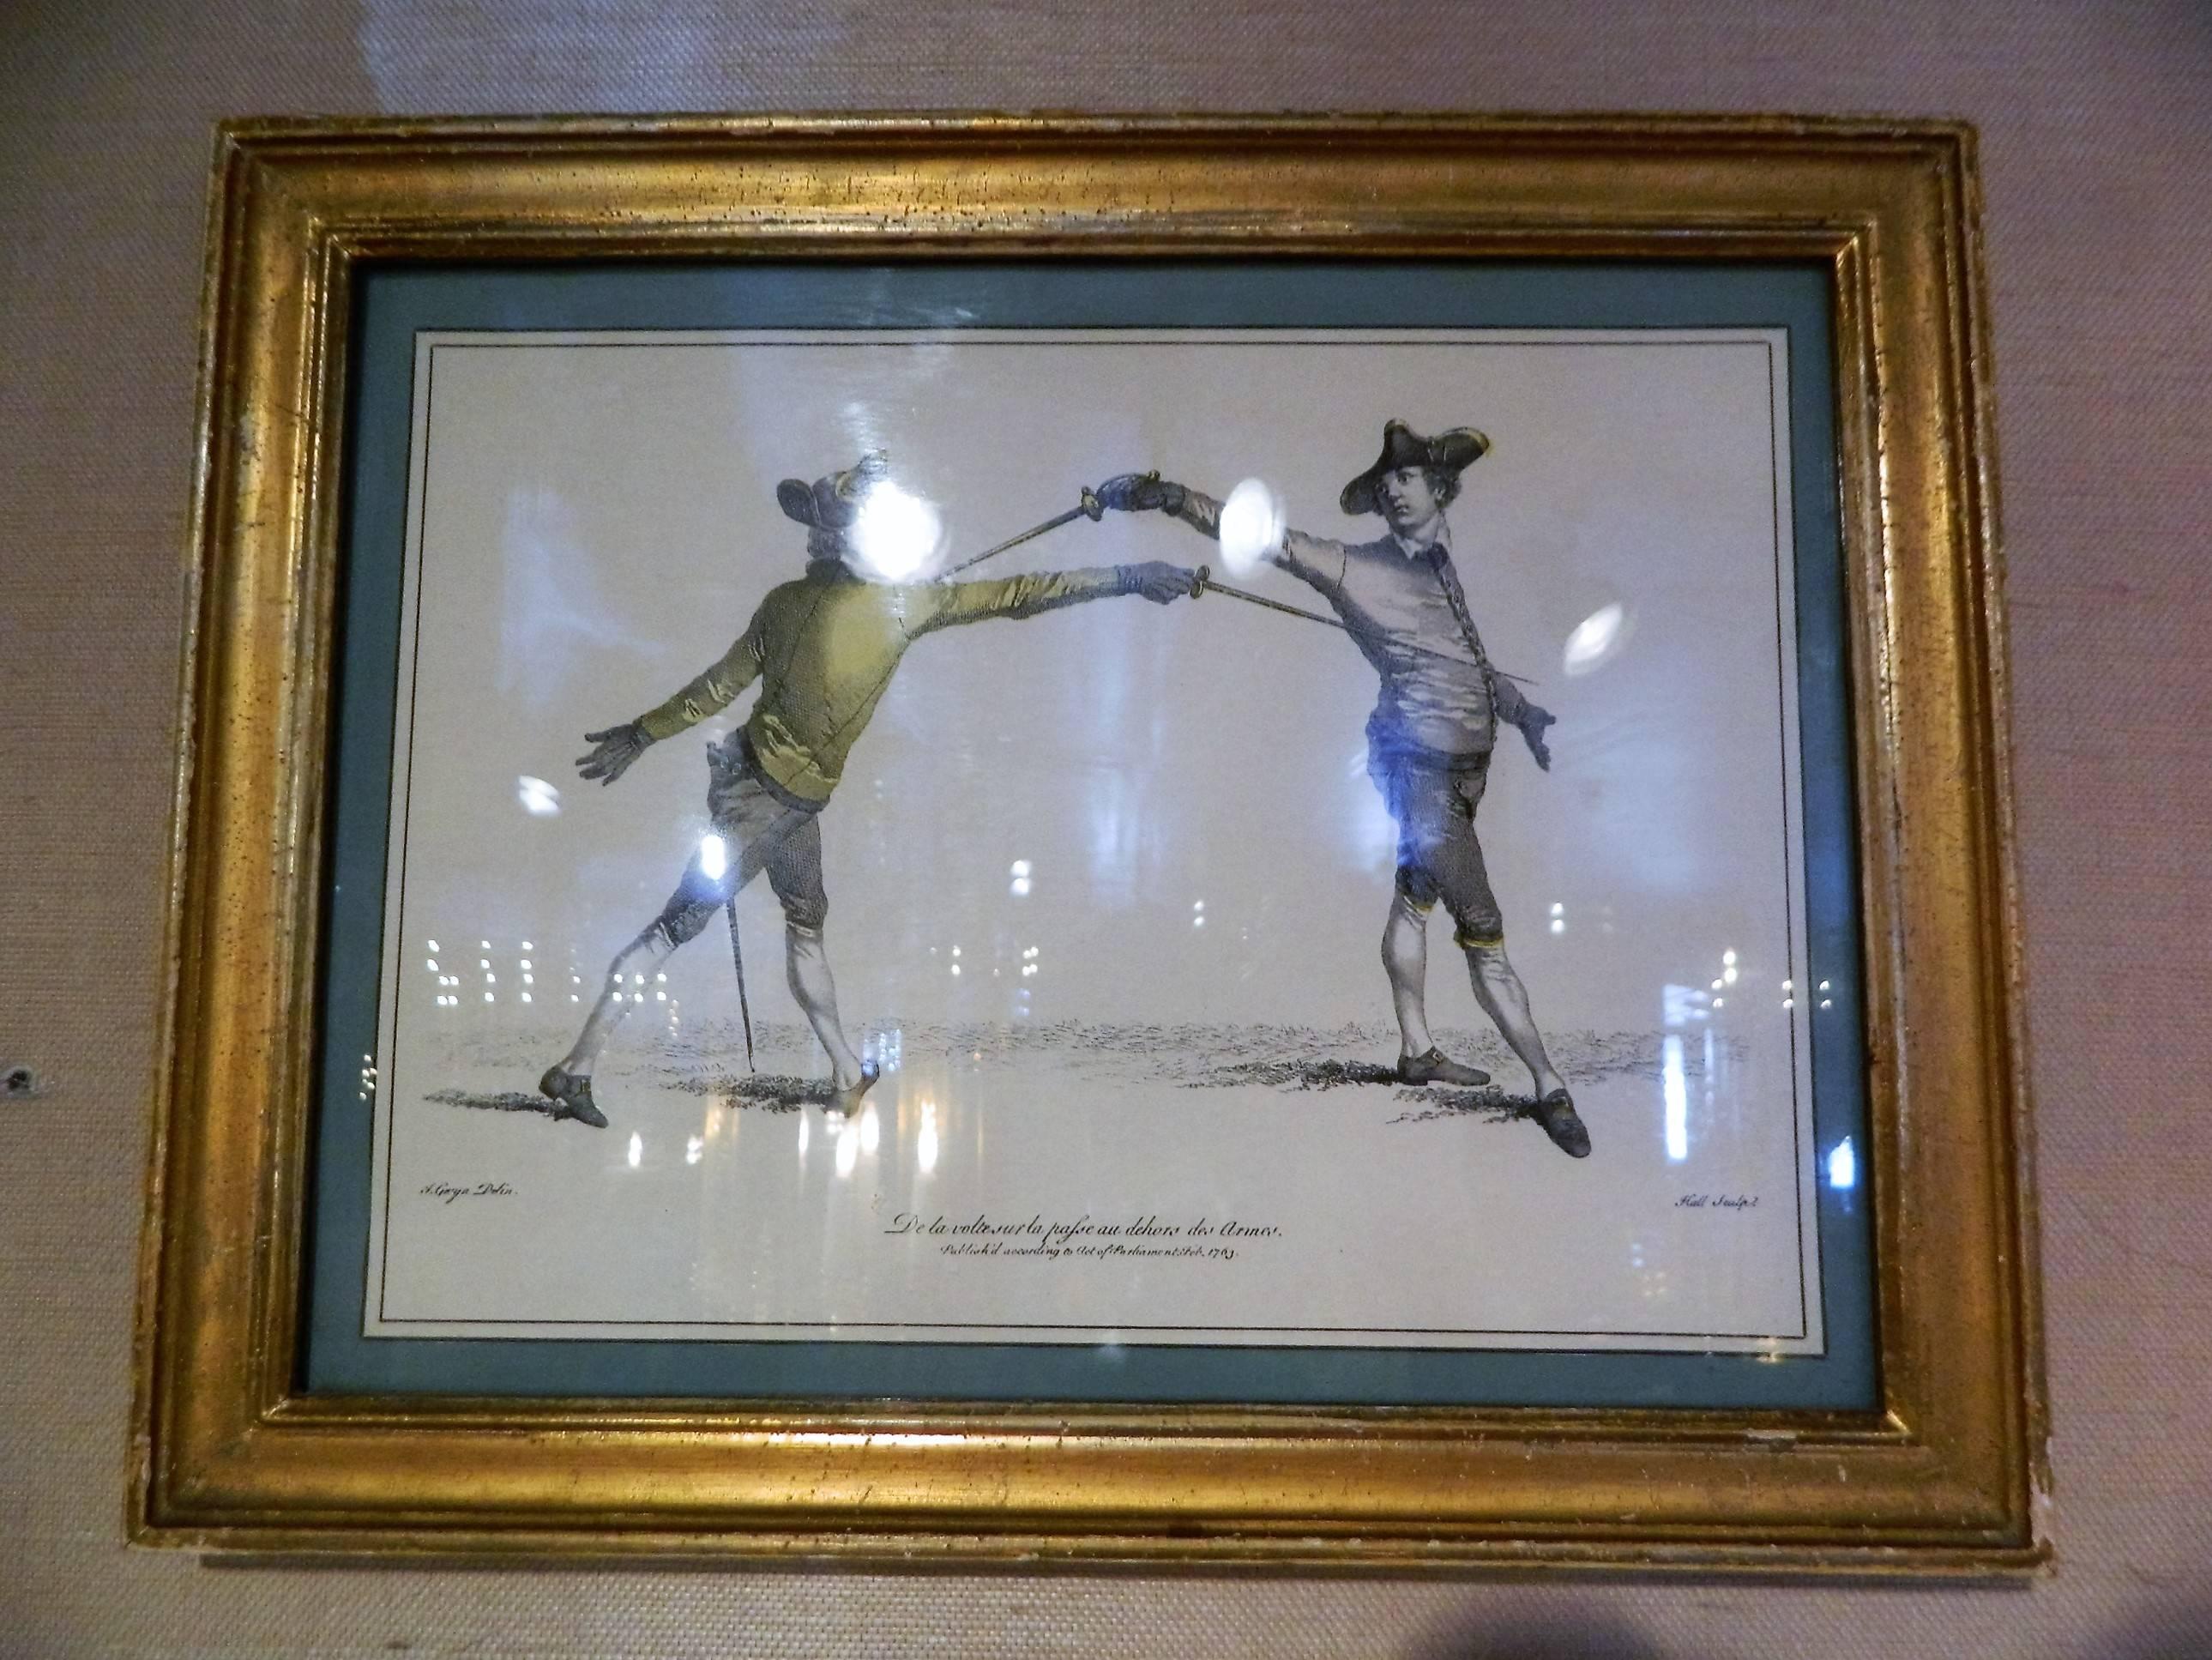 Set of four framed French prints of men fencing, circa 1763.